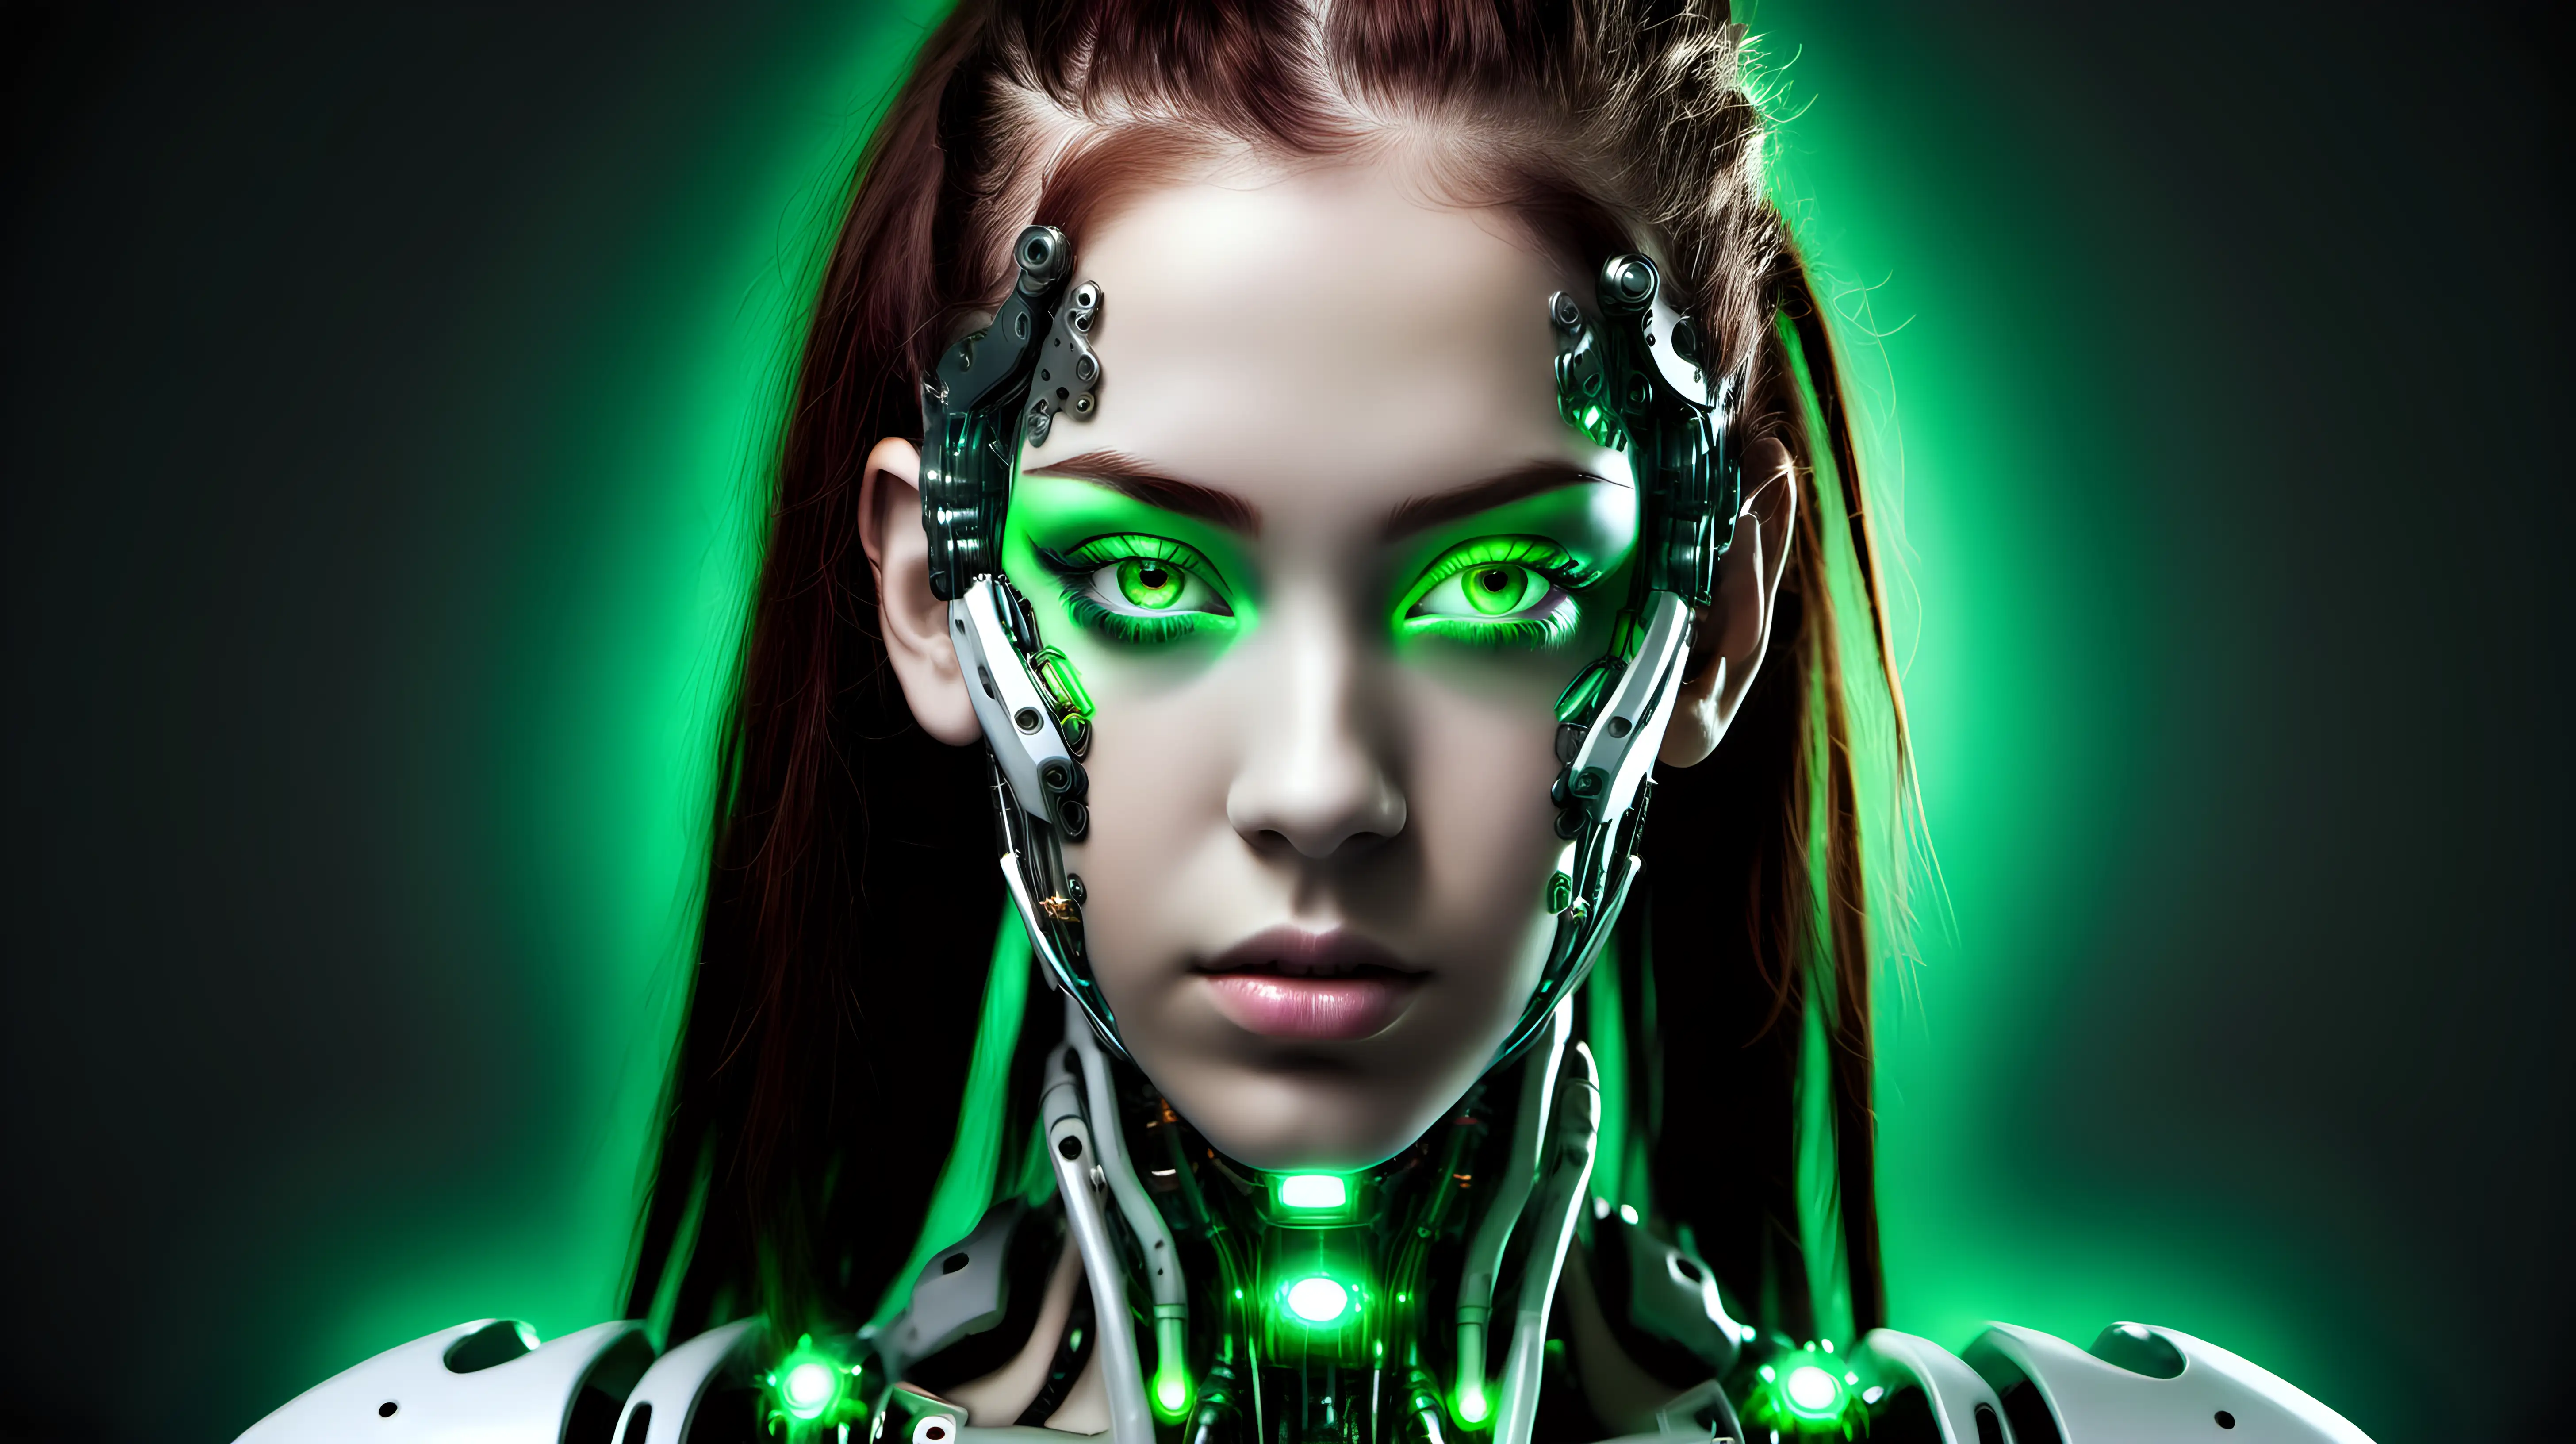 Cyborg woman, 18 years old. She has a cyborg face, but she is extremely beautiful. The color of her eyes is natural green, not neon green.